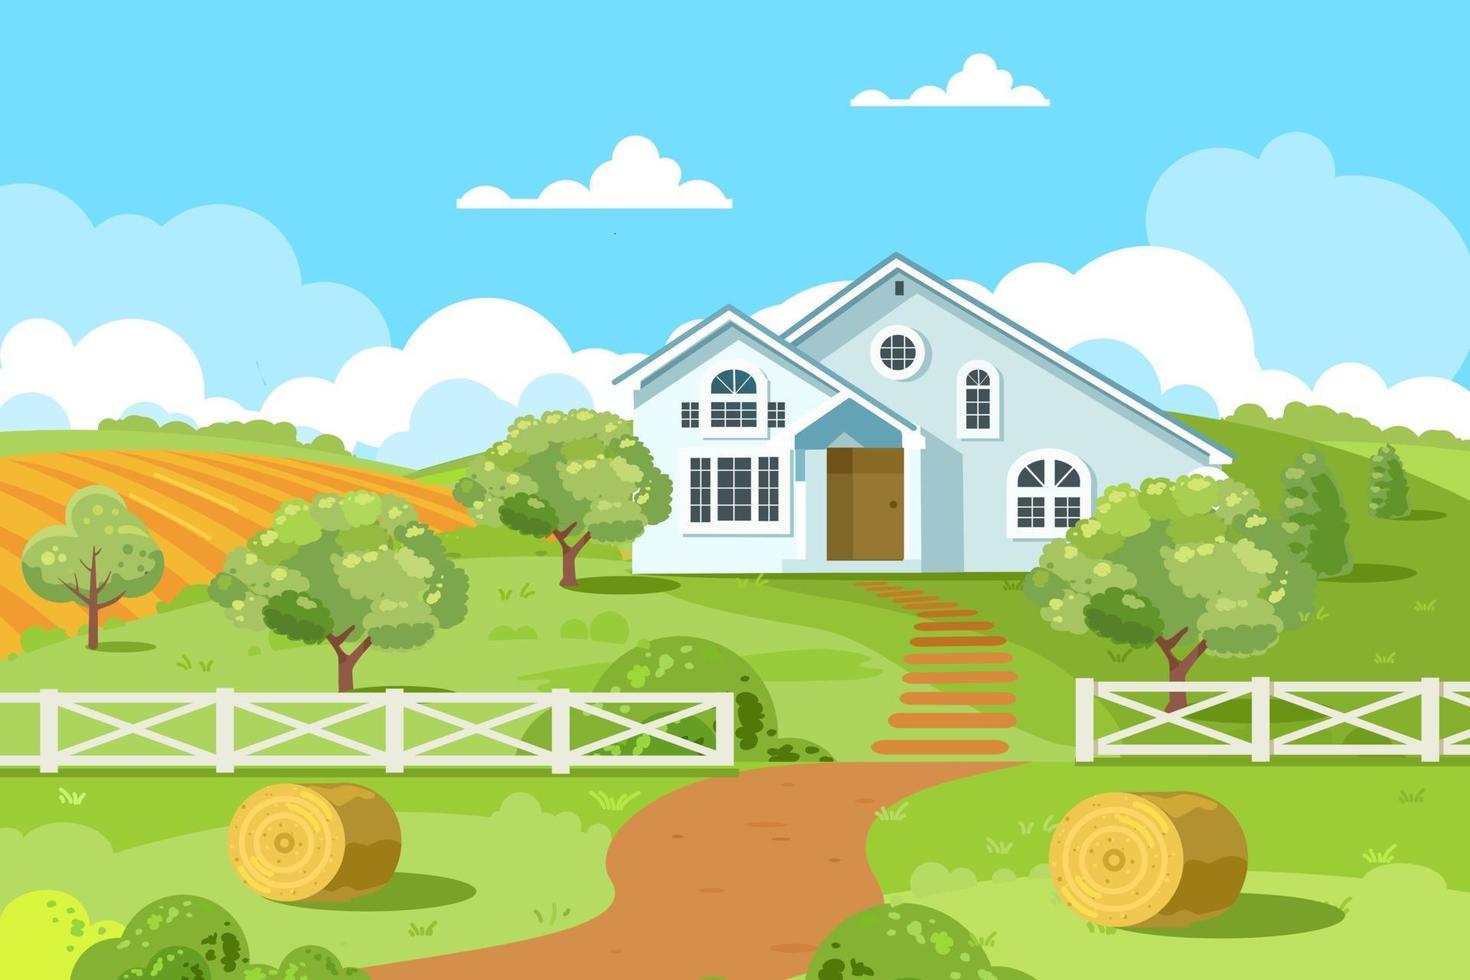 Summer garden with a white house, ponds, green trees. Country landscape. Vector flat illustration